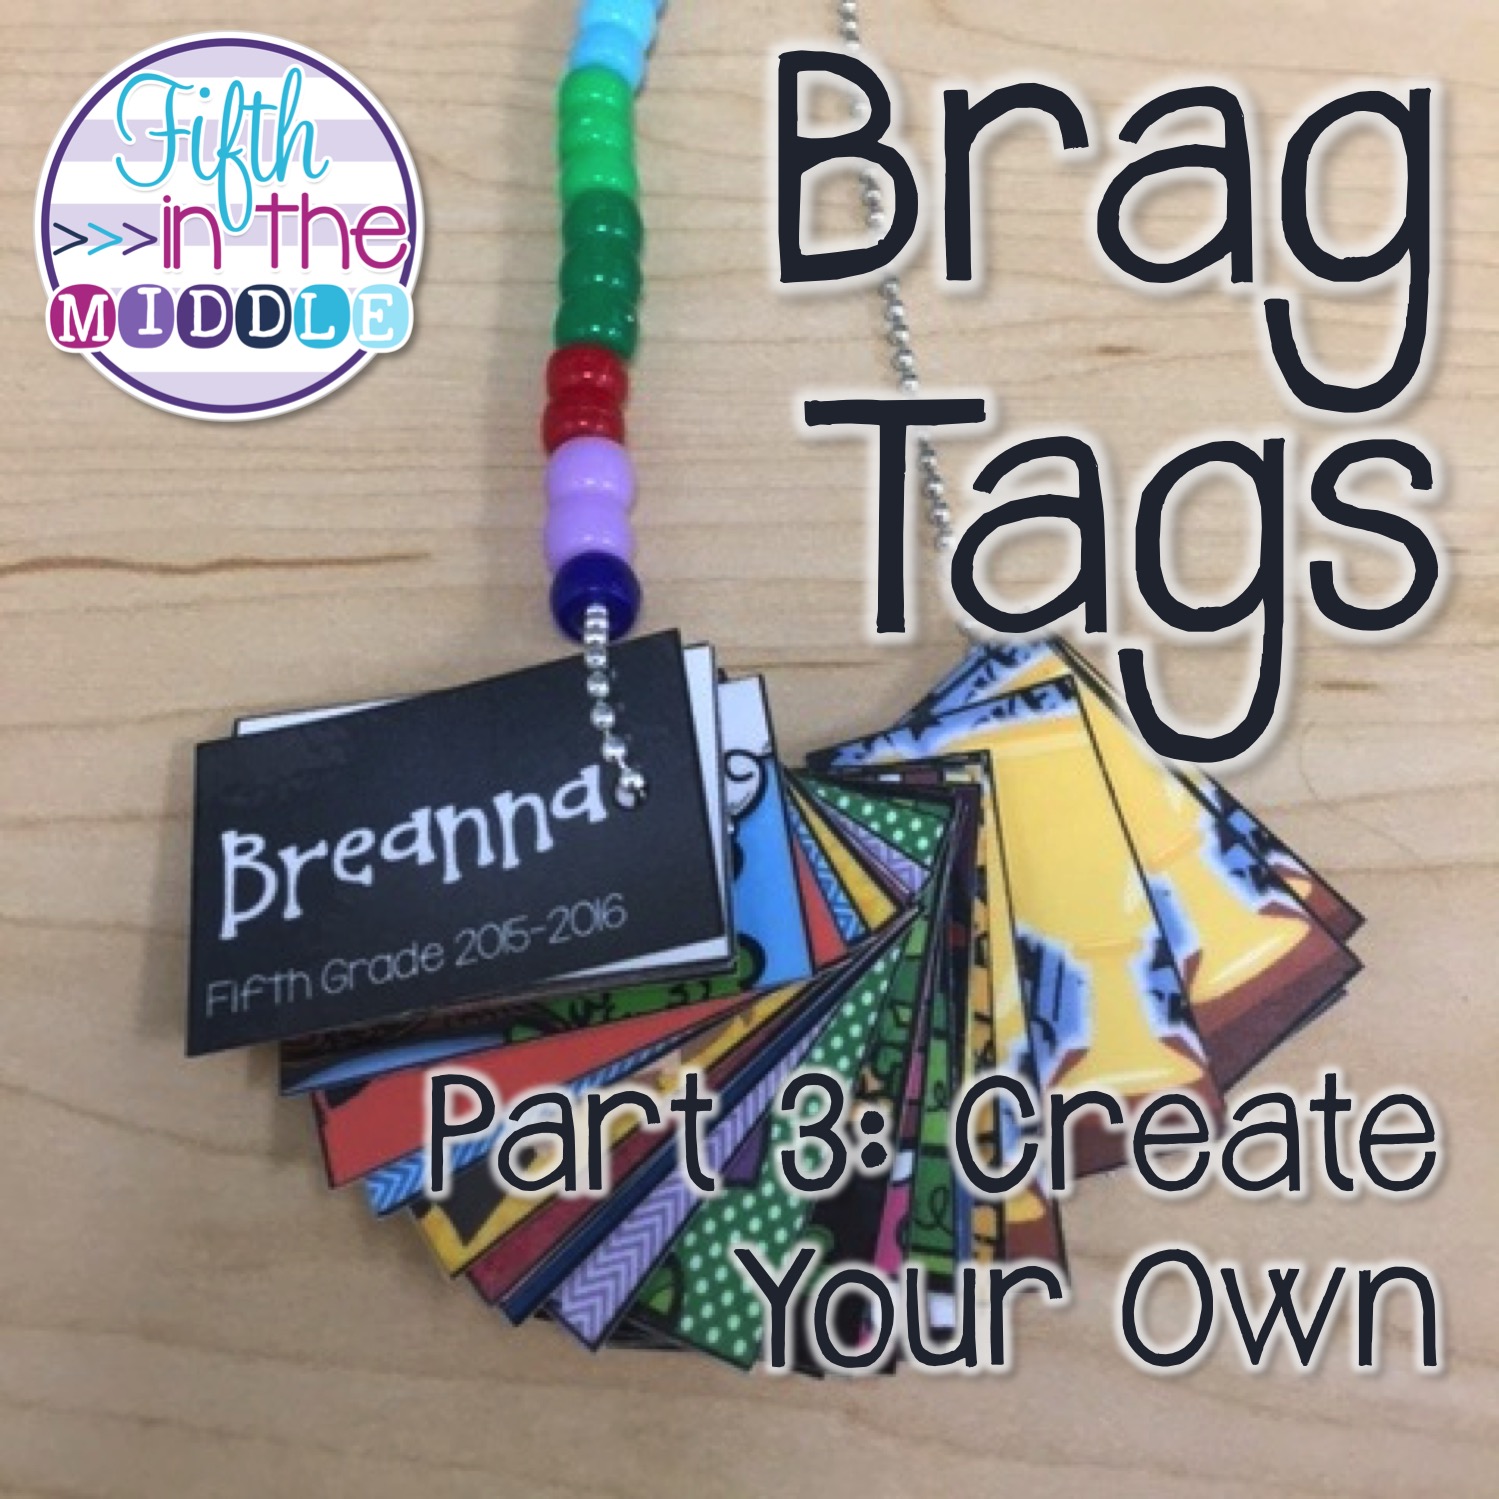 how-to-create-brag-tags-fifth-in-the-middle